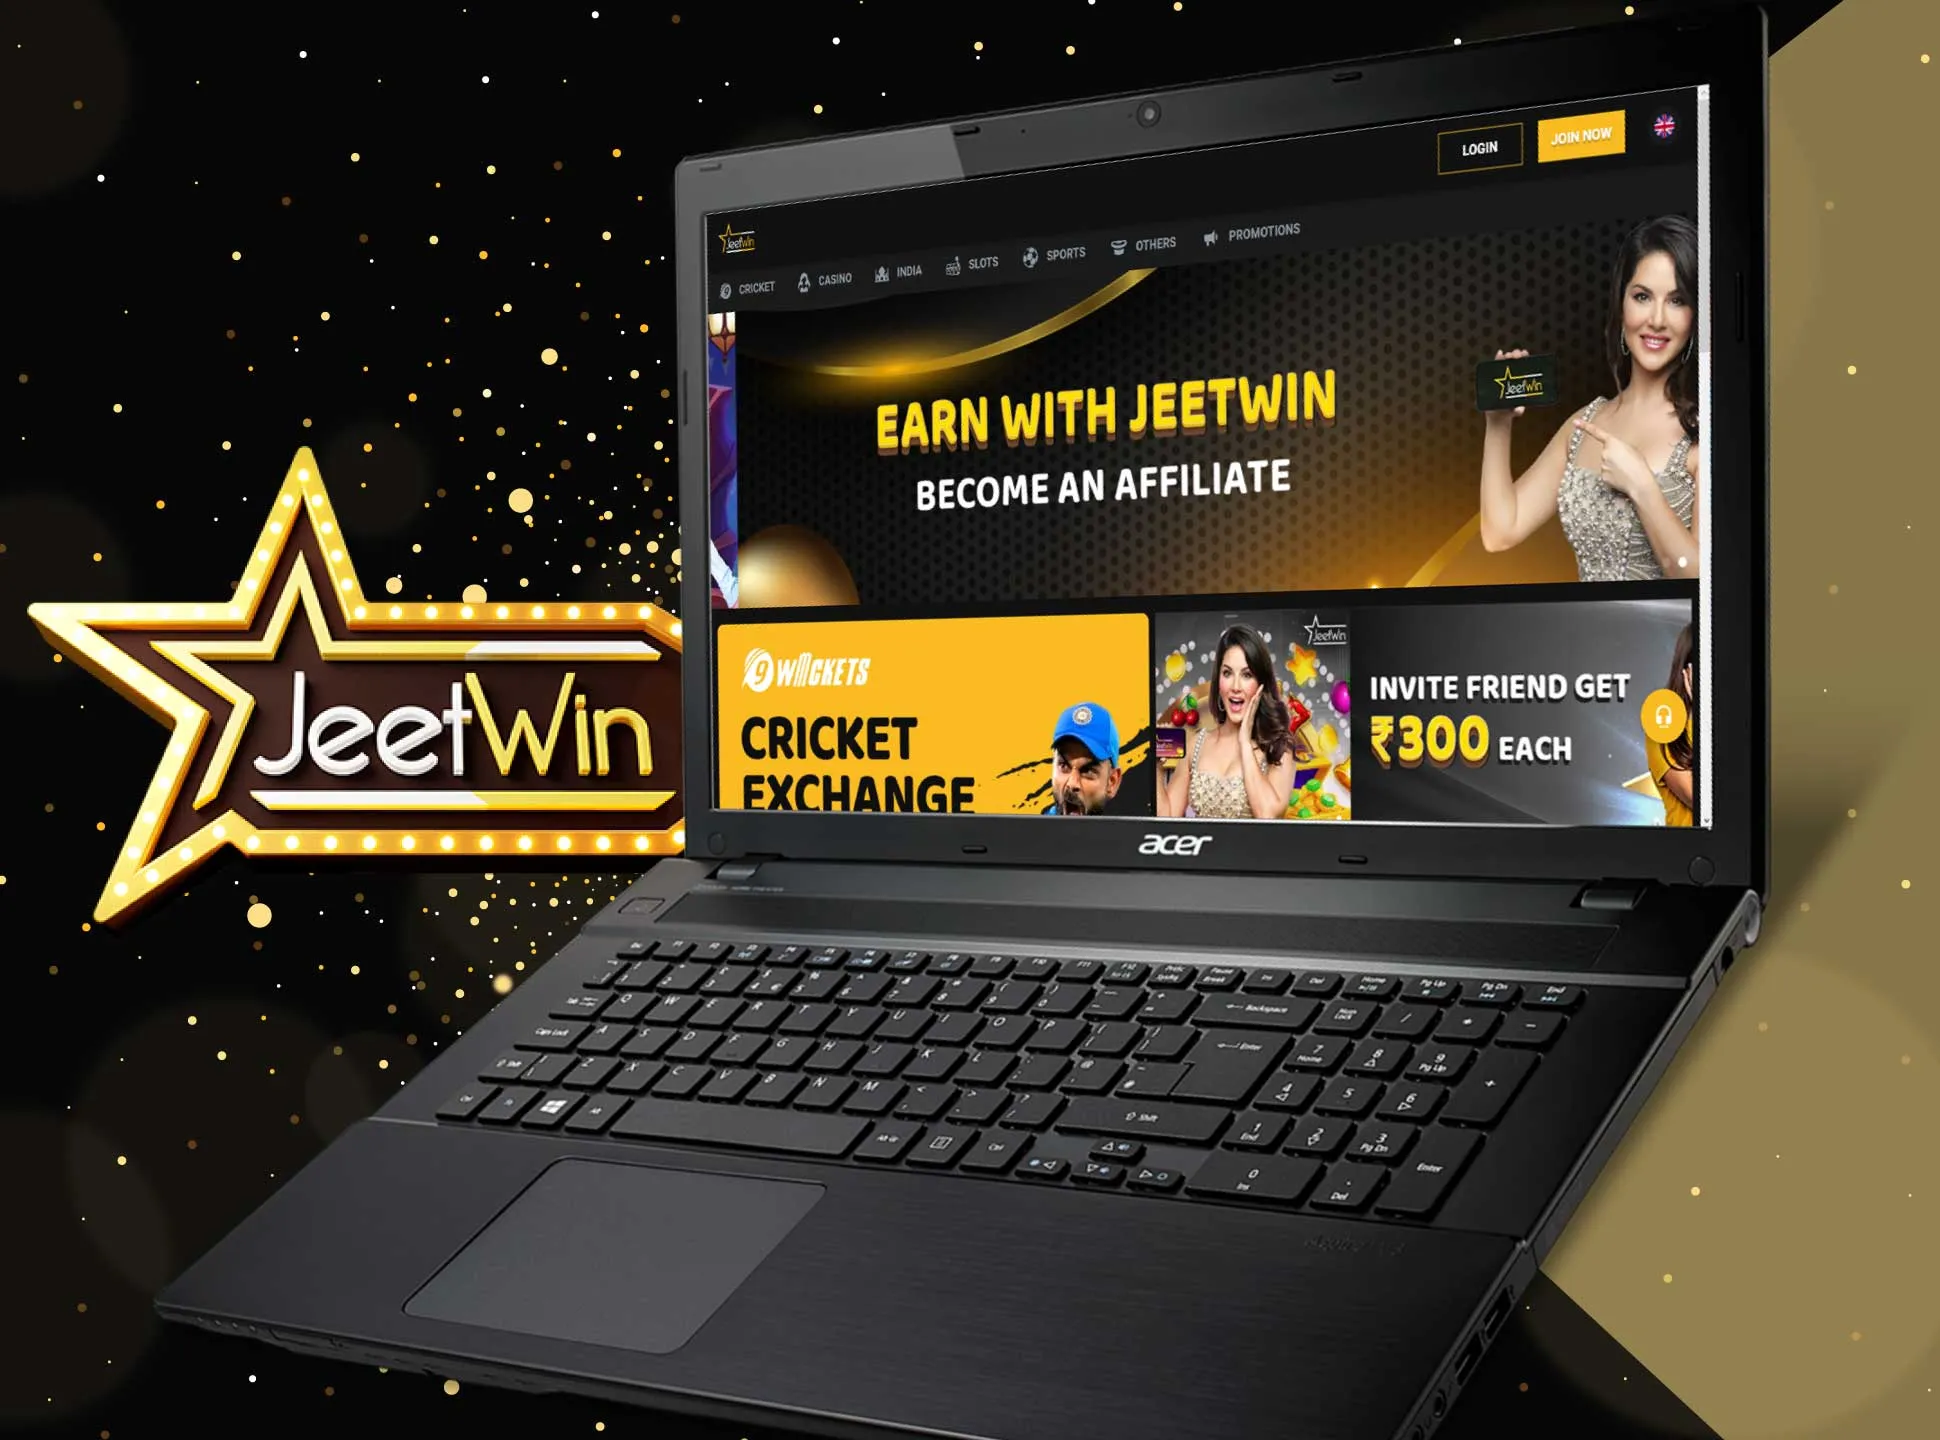 You can also download the desktop version of Jeetwin on your PC or laptop.